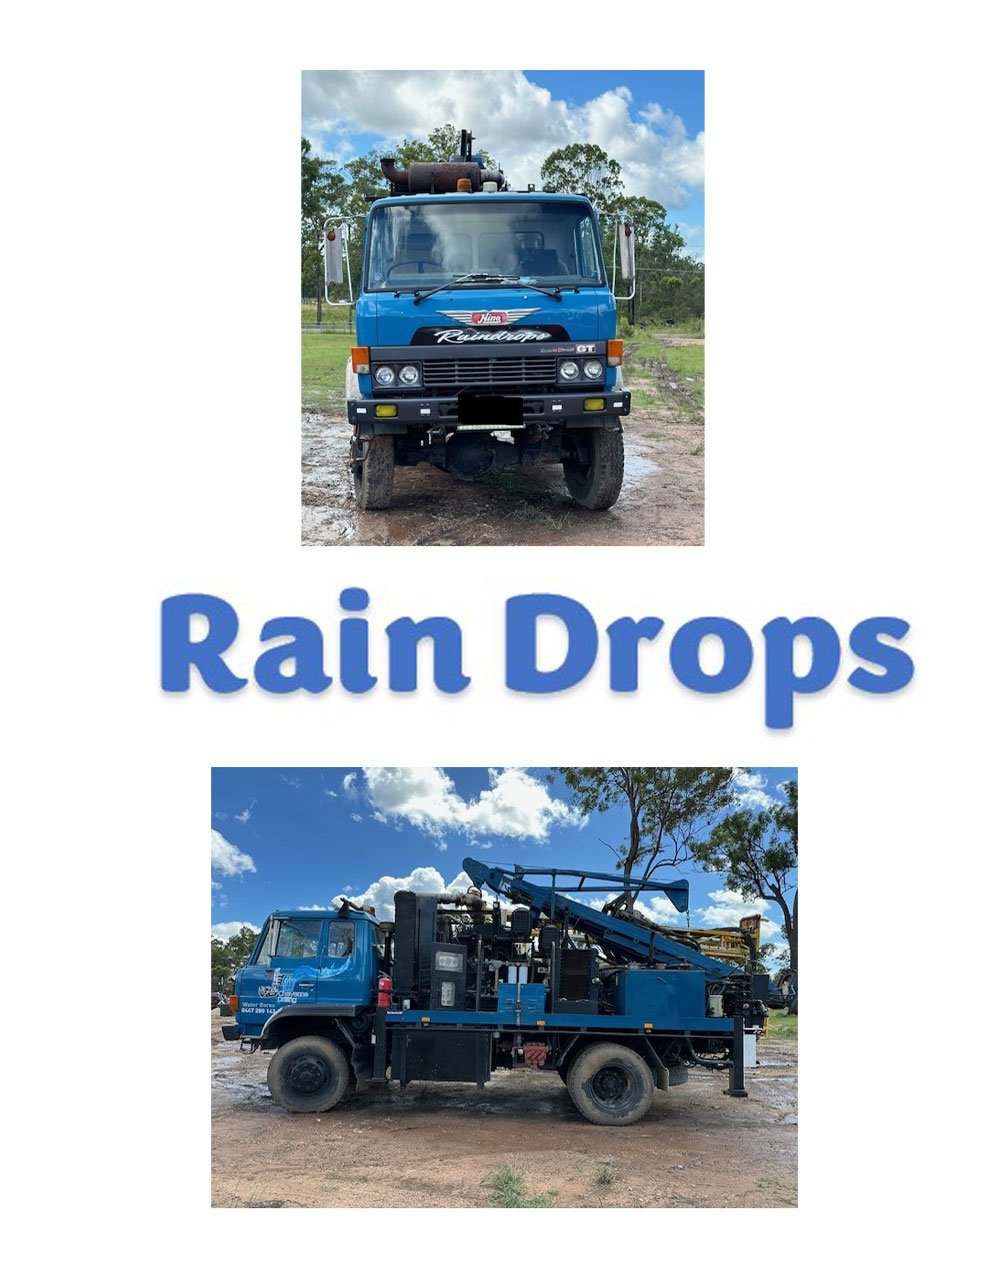 Blue Drilling Truck Parked on A Dirt Area with Cloudy Sky in The Background, Labeled 'Rain Drops' — Bore Drilling in Bundaberg, QLD